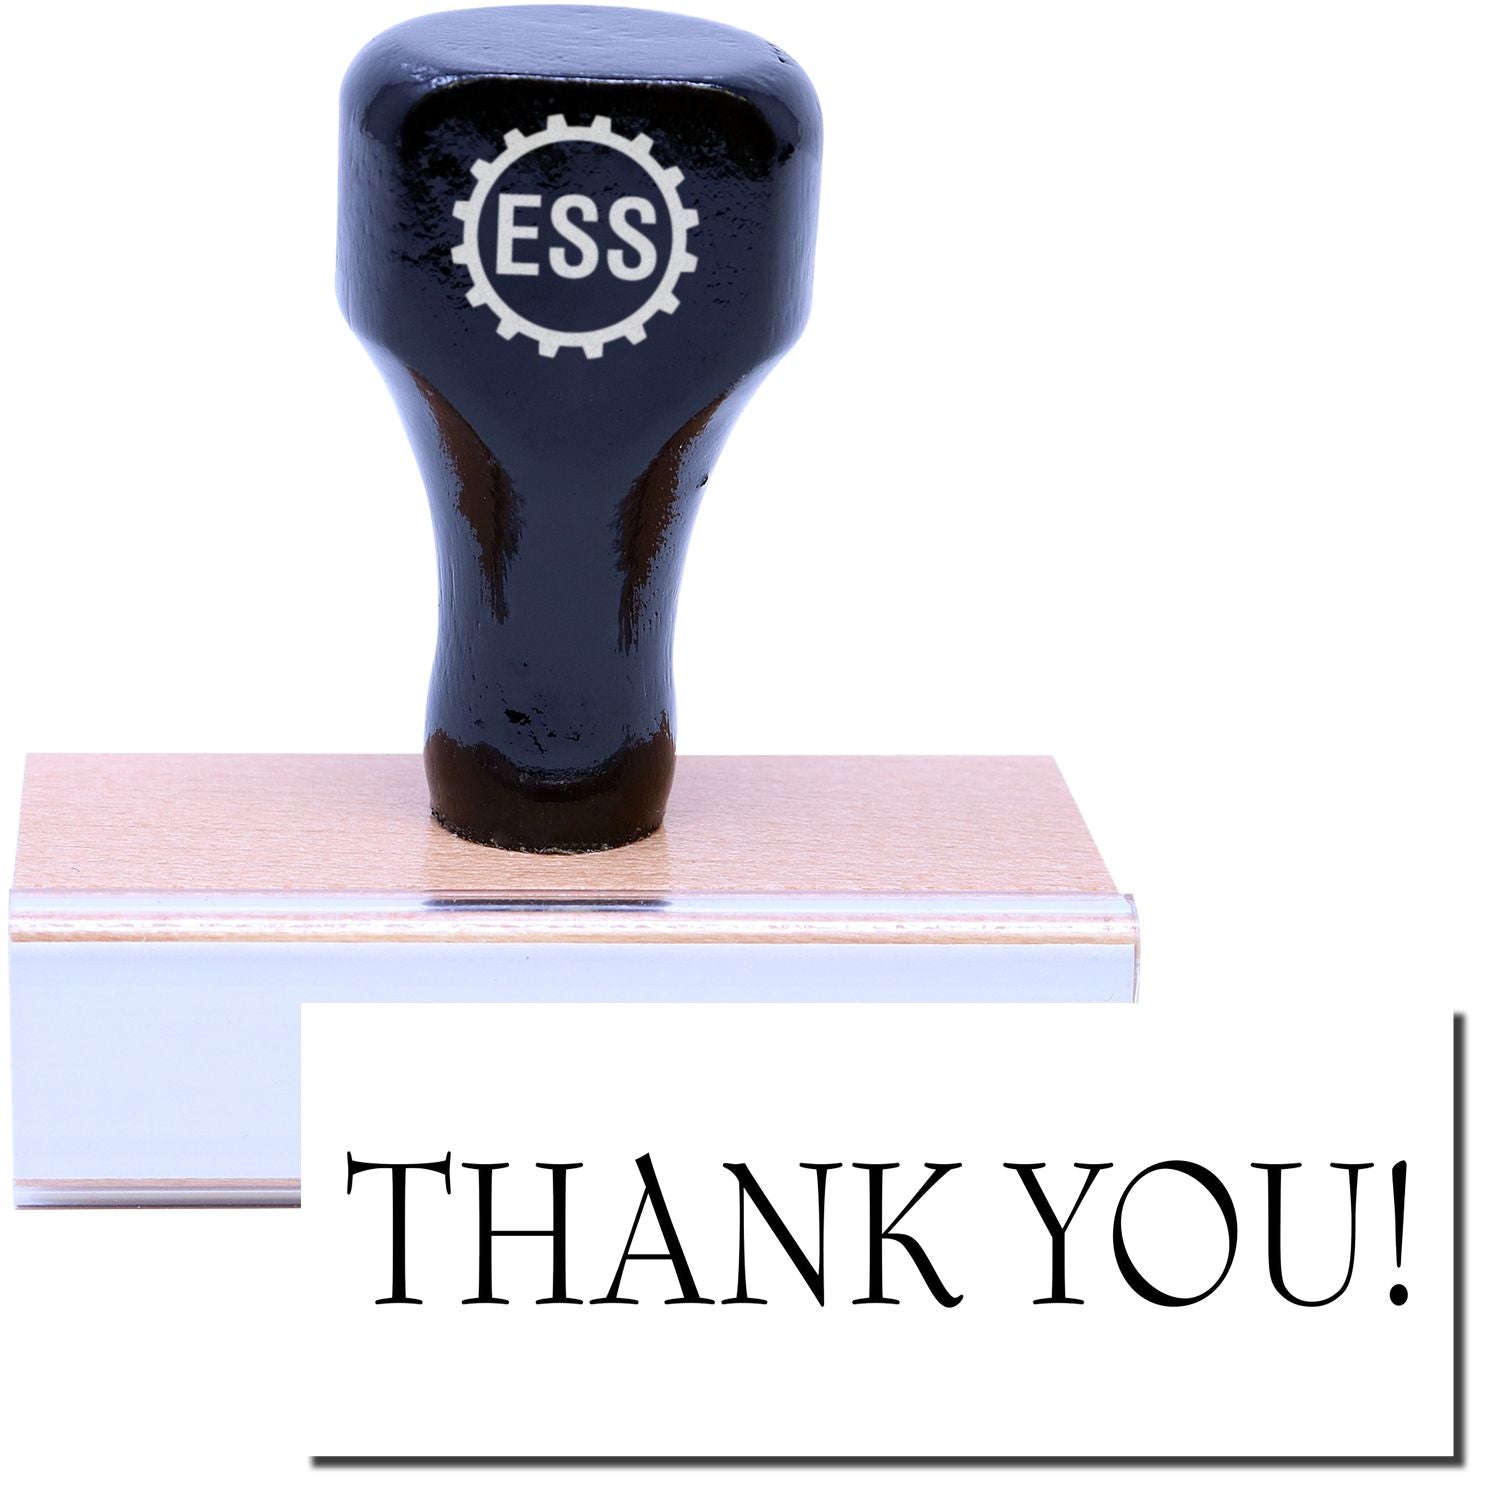 A stock office rubber stamp with a stamped image showing how the text "THANK YOU!" in a large font is displayed after stamping.